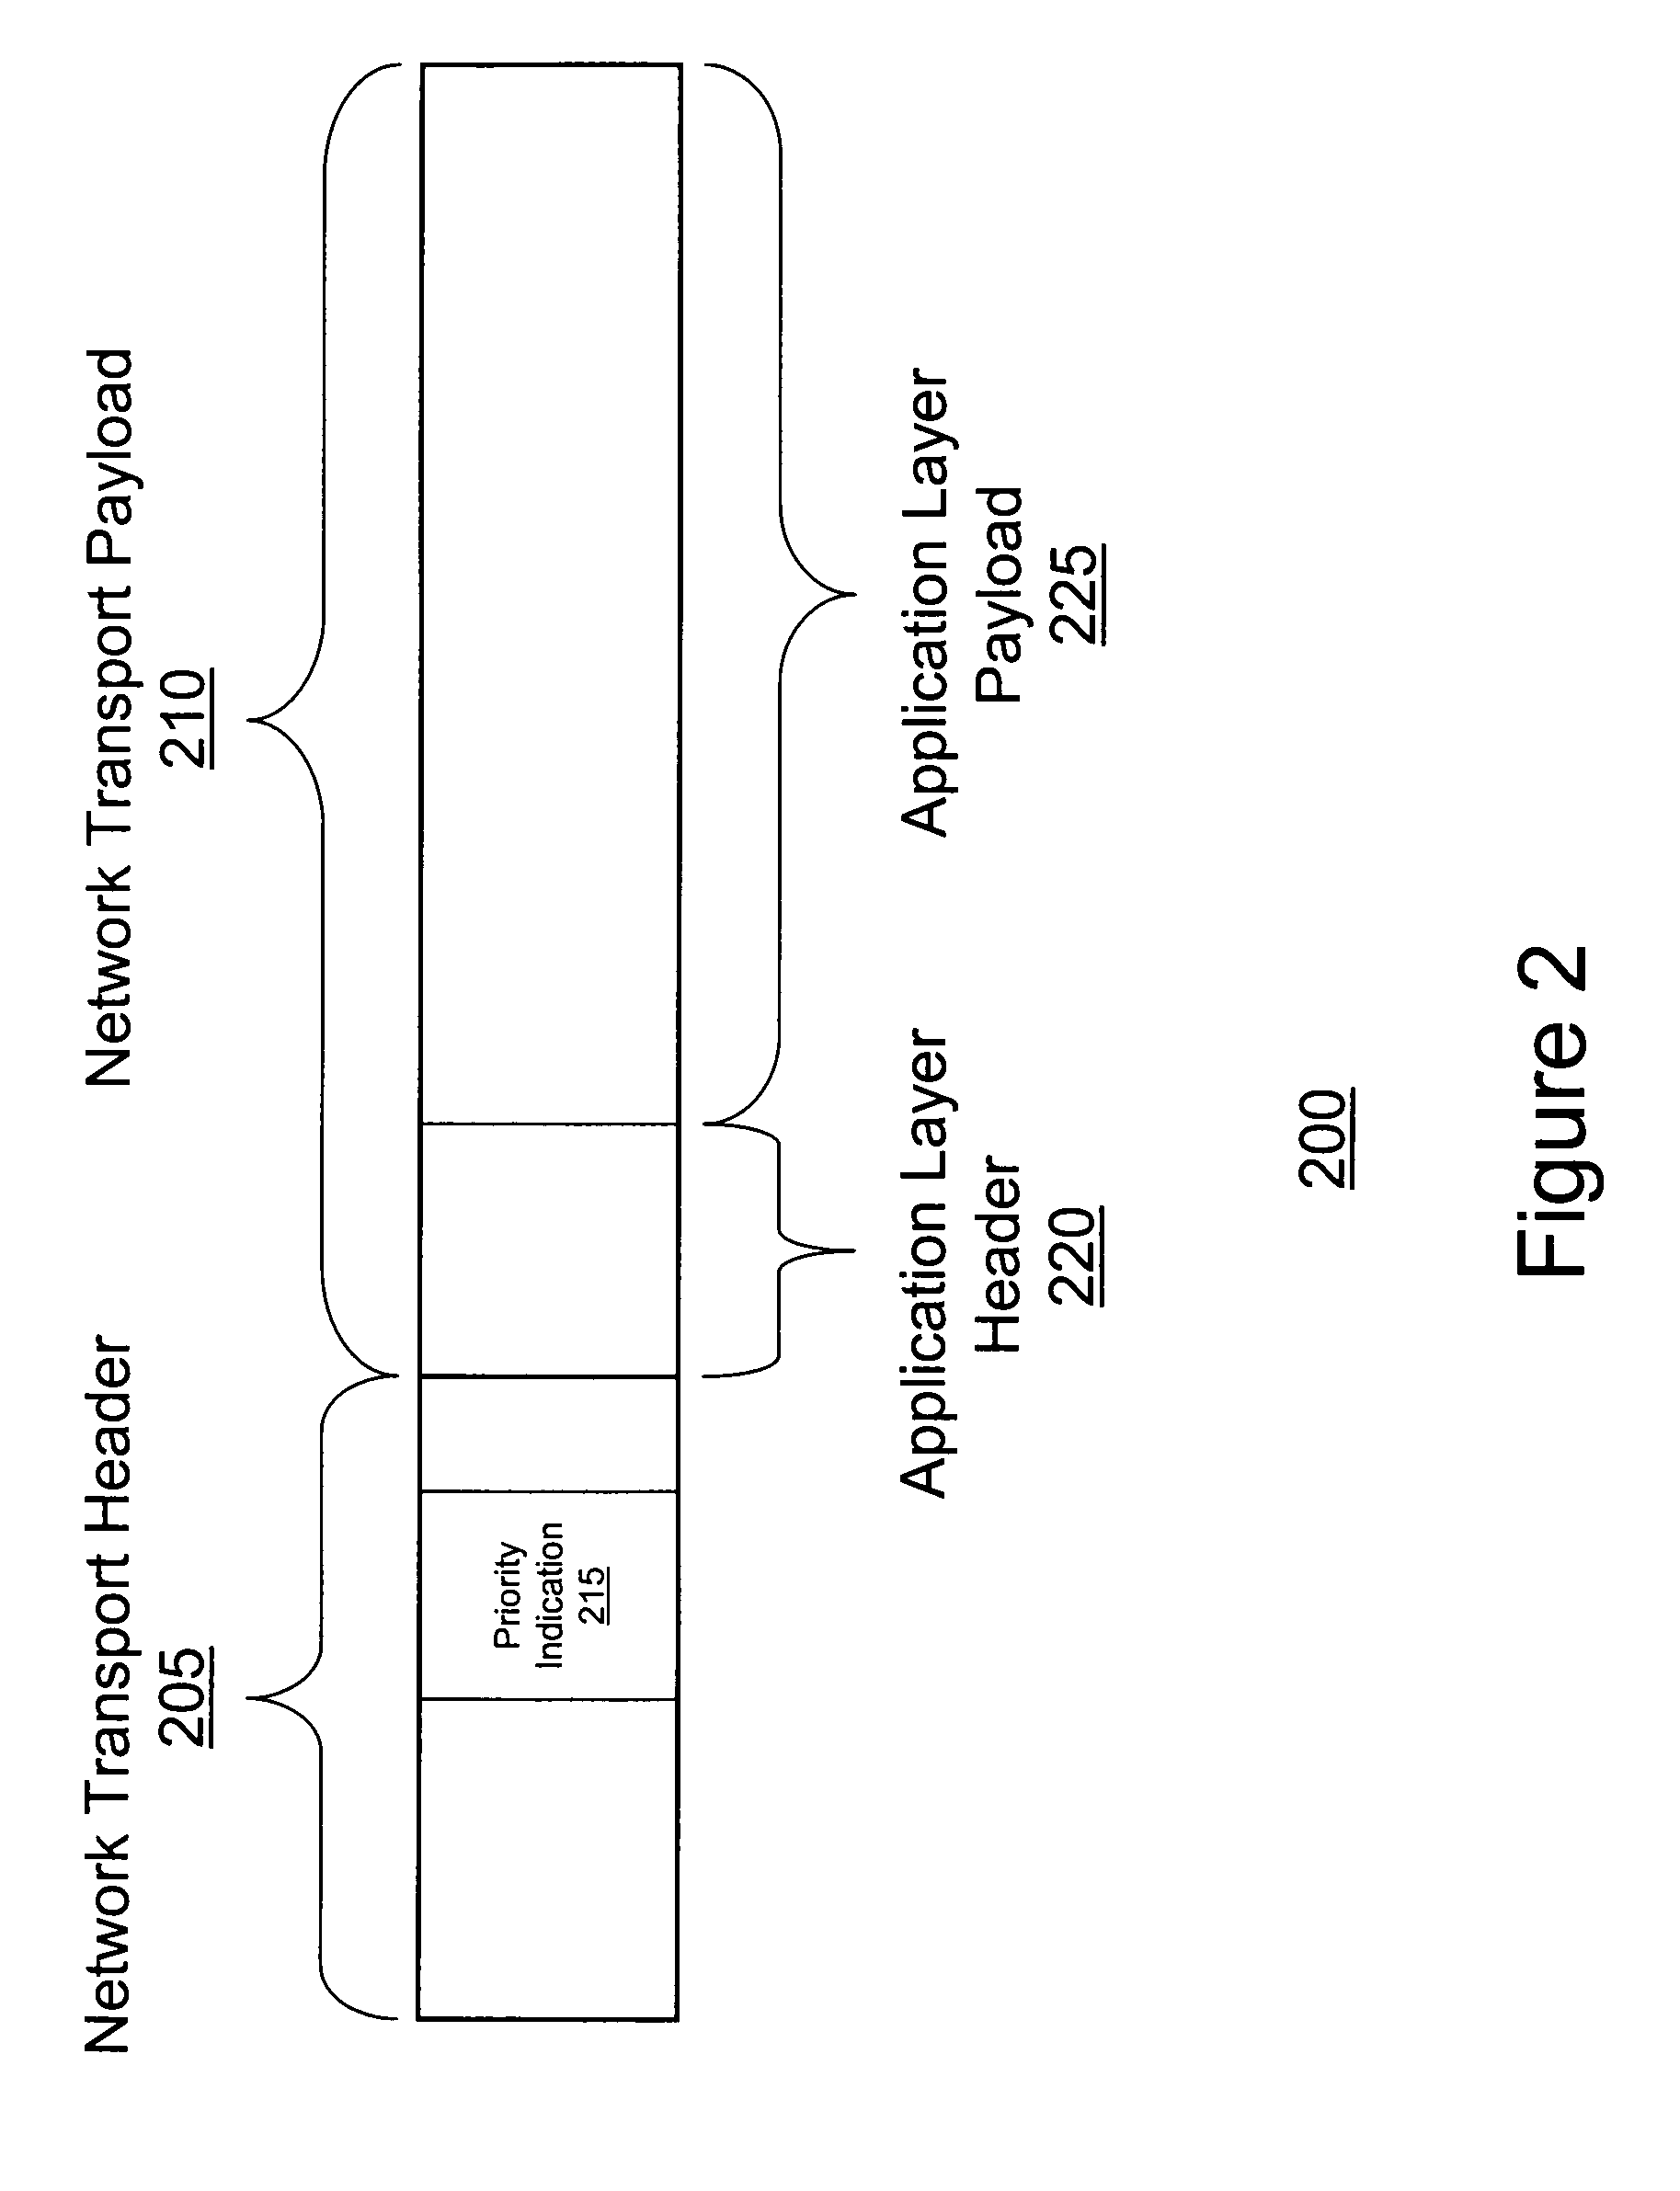 System and method for transmitting video information